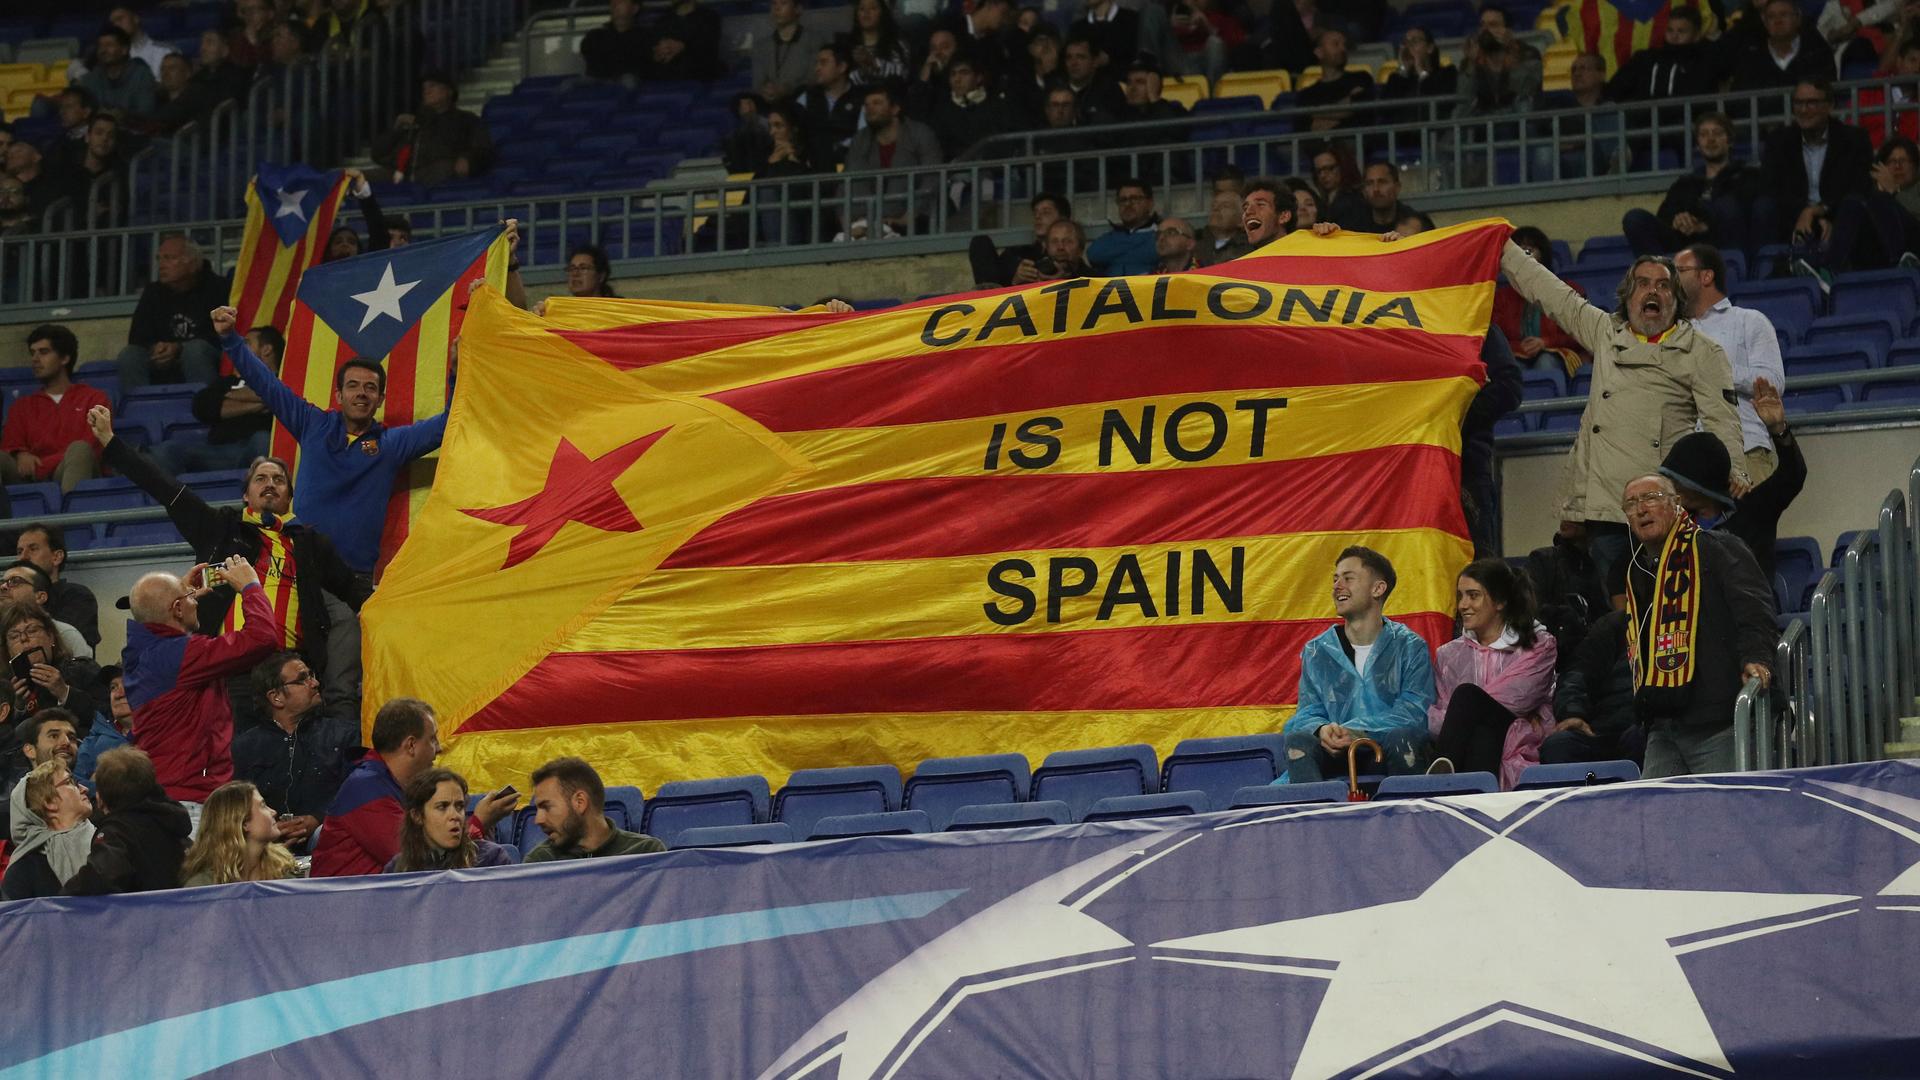 Barcelona soccer fans make their feelings known about Catalan independence, at a game on Wednesday Oct 18th 2017